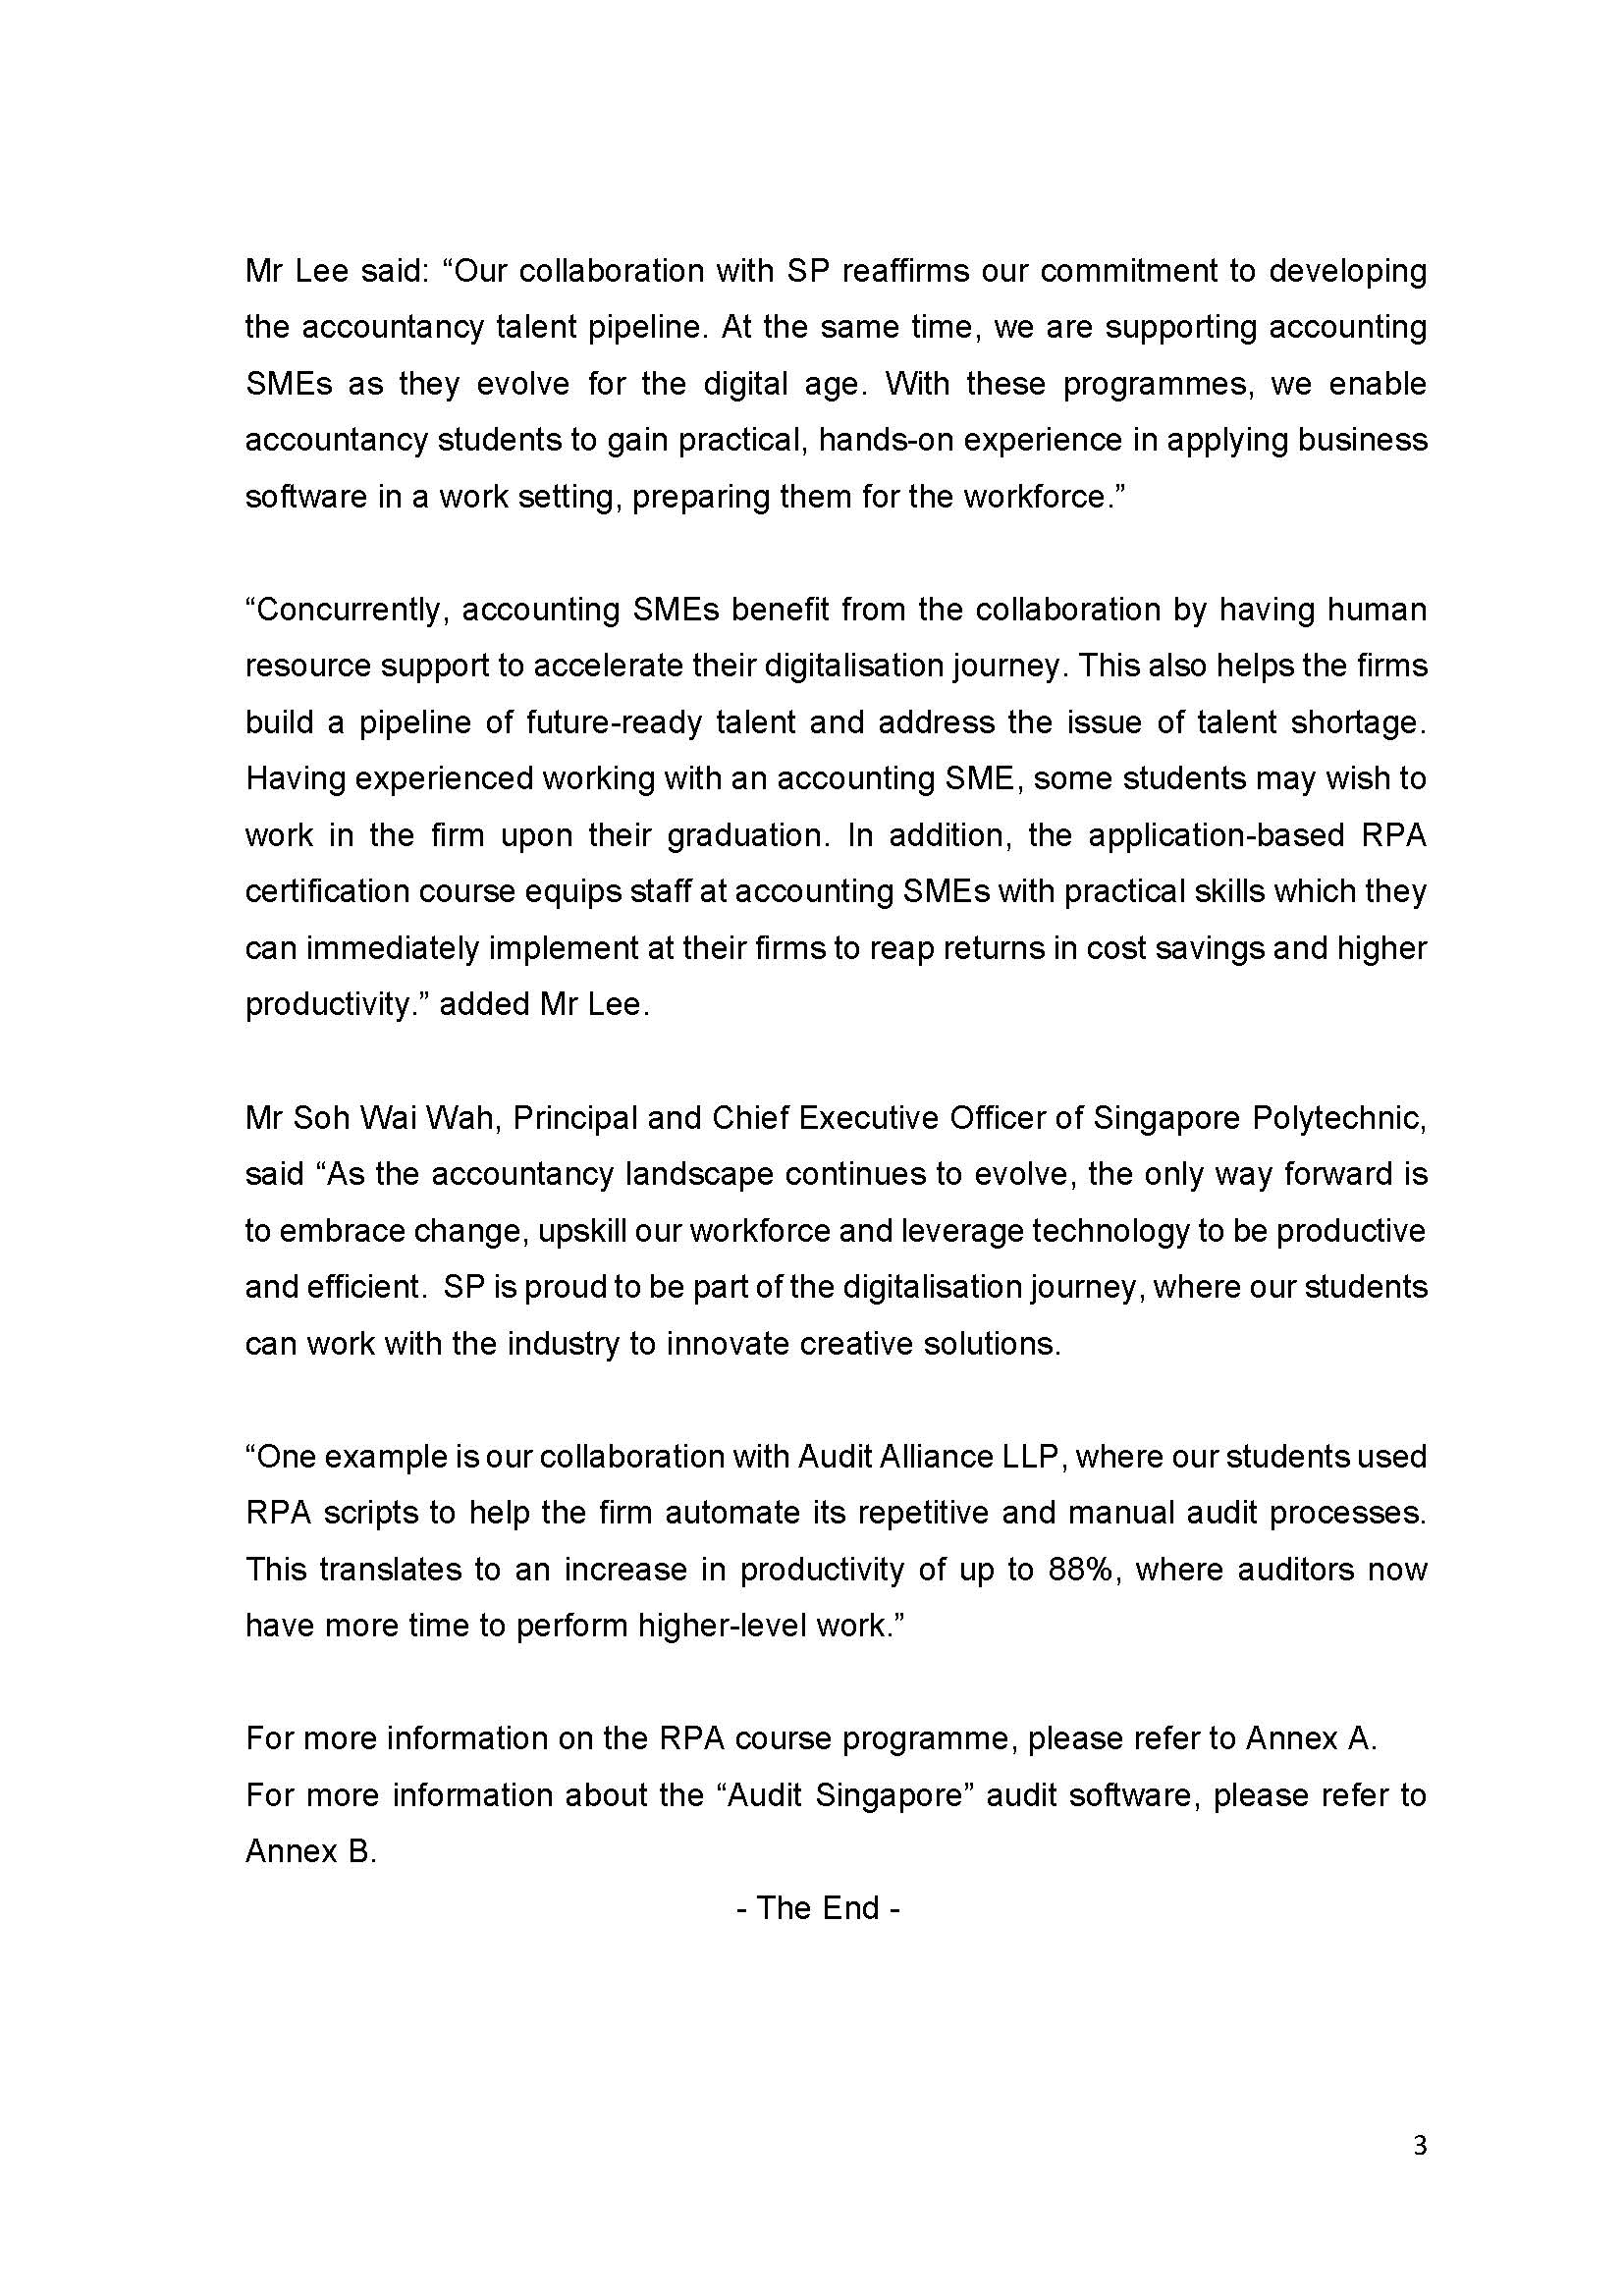 ISCA_SP MOU Press Release Final for issuance_SP_Page_3